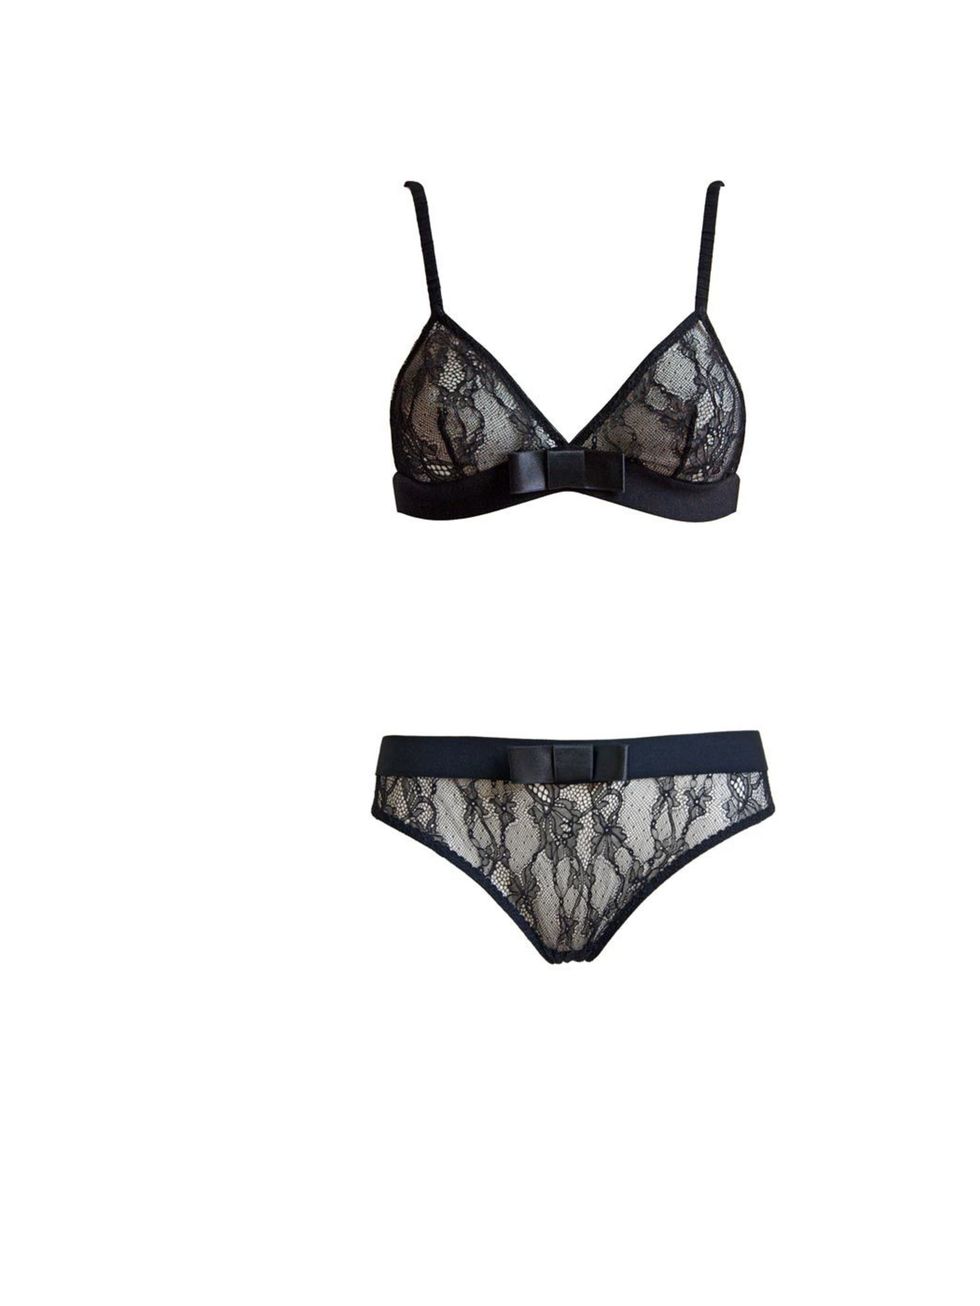 <p><a href="http://www.kriss-soonik.com/products-page/bras/silvia-lace-bra/">Kriss Soonik</a> 'Silvia' lace bra, £45, and 'Maike' lace briefs, £39</p>